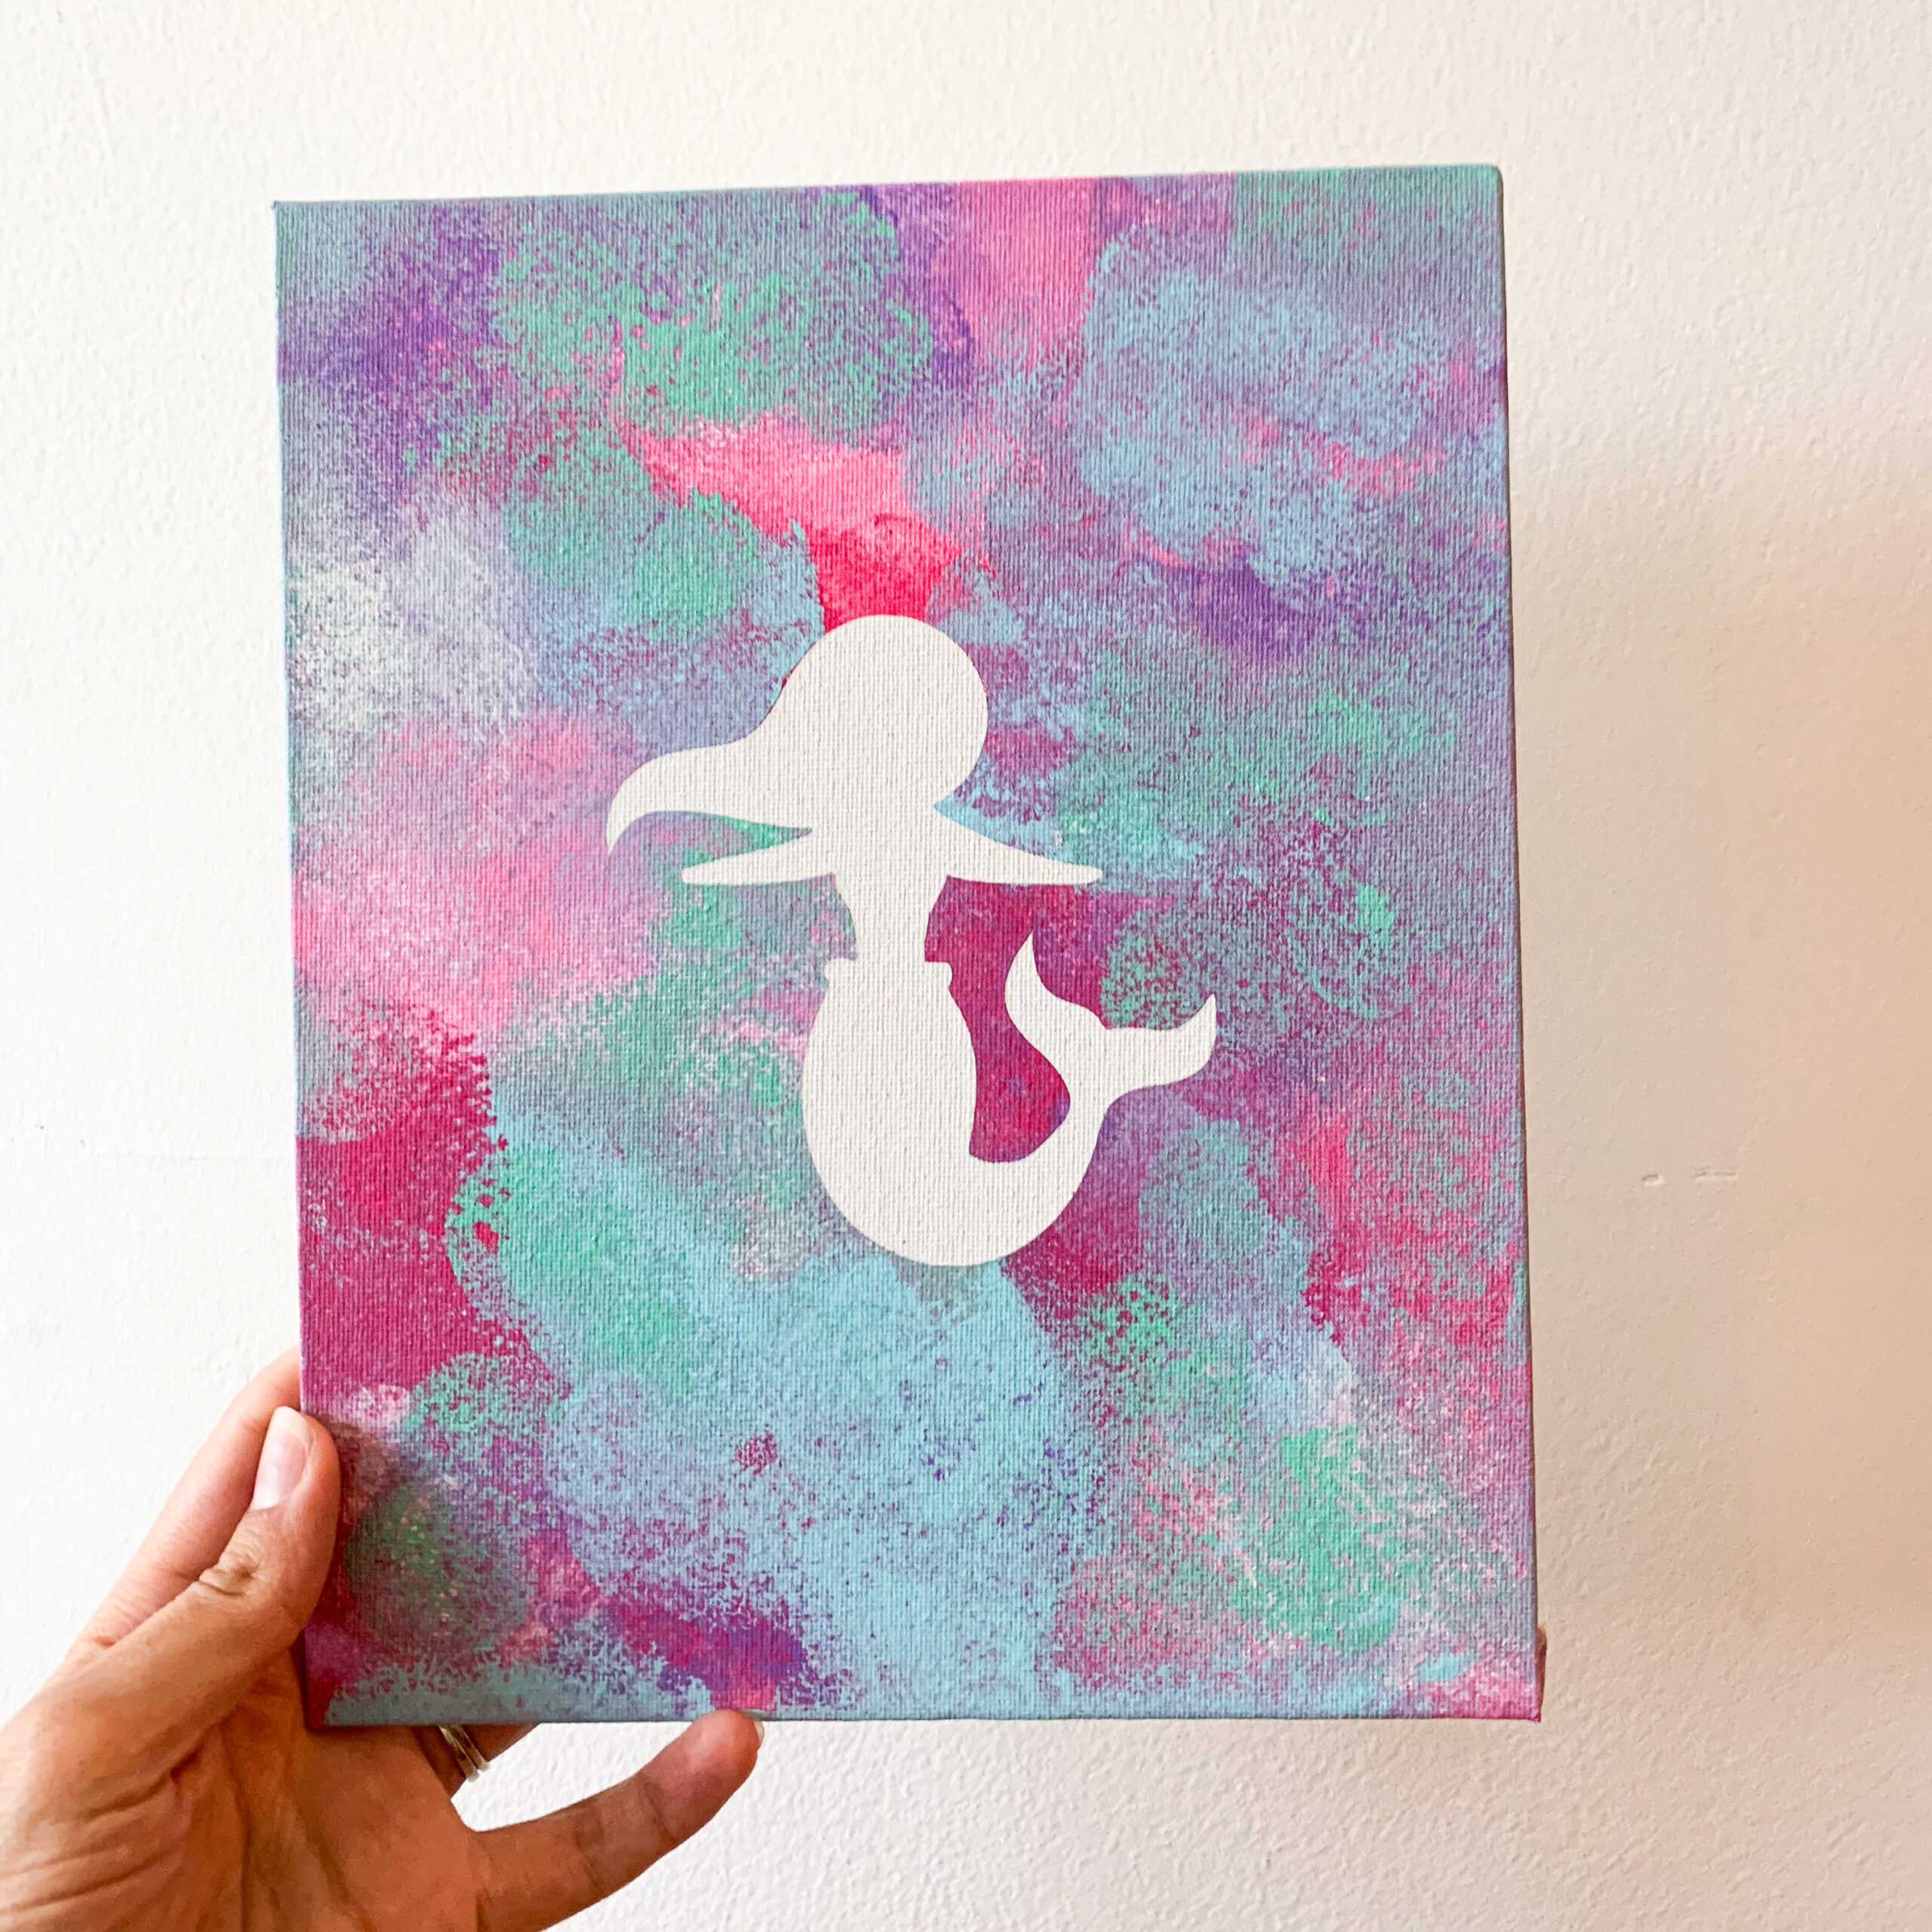 painting ideas for kids: hidden image of a mermaid